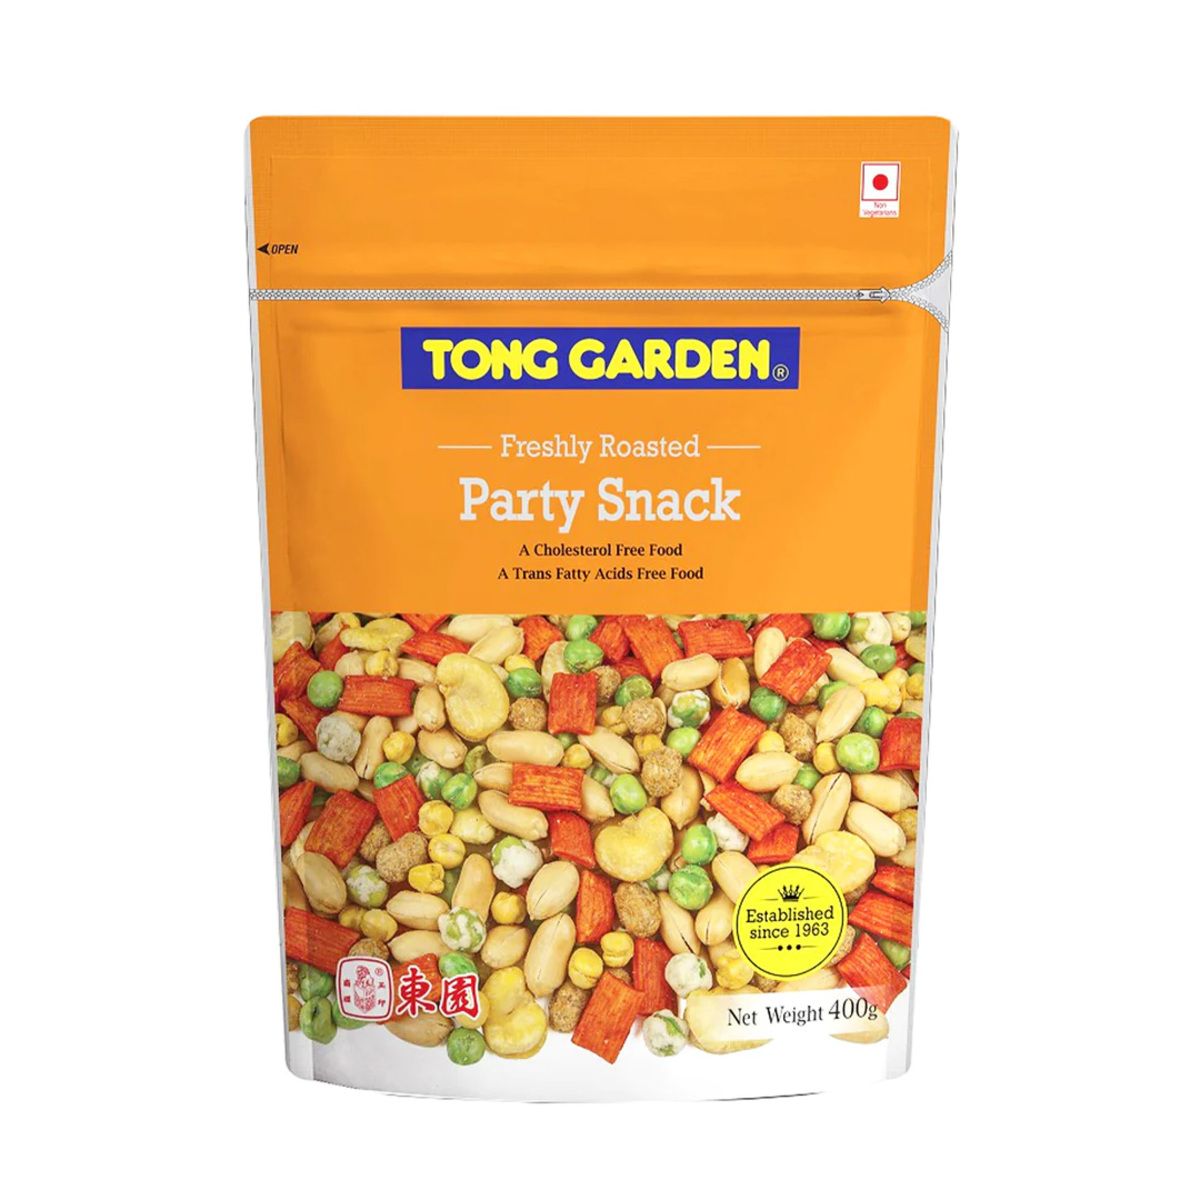 Tong Garden Freshly Roasted Party Snack 365g